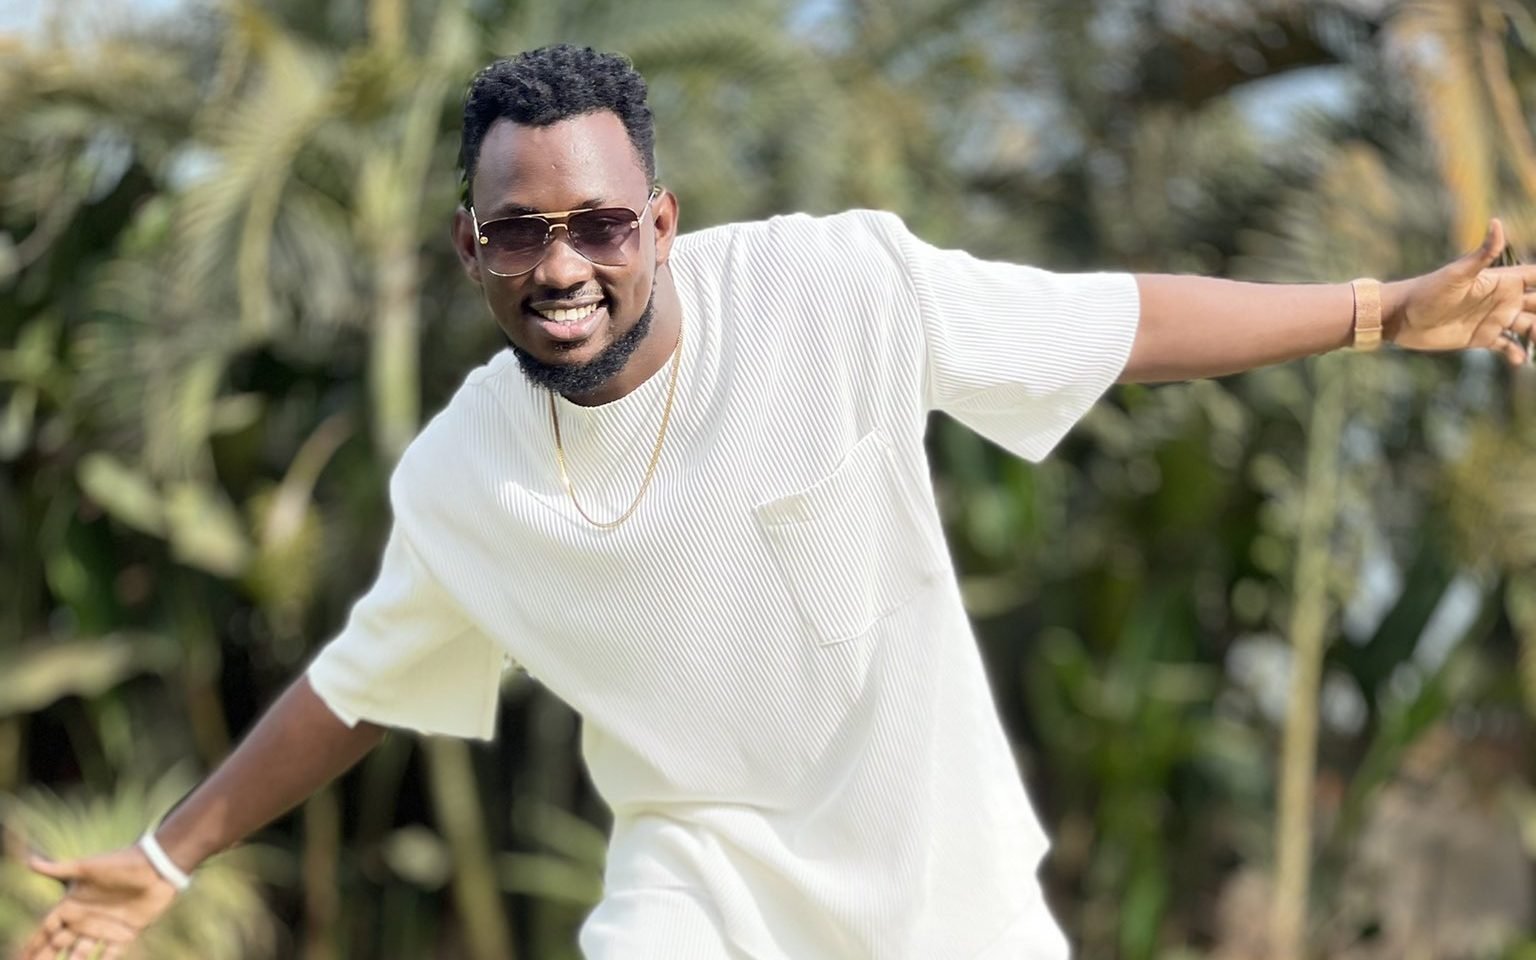 levixone-shares-why-he-shields-his-family-from-social-media-spotlight-(watch)